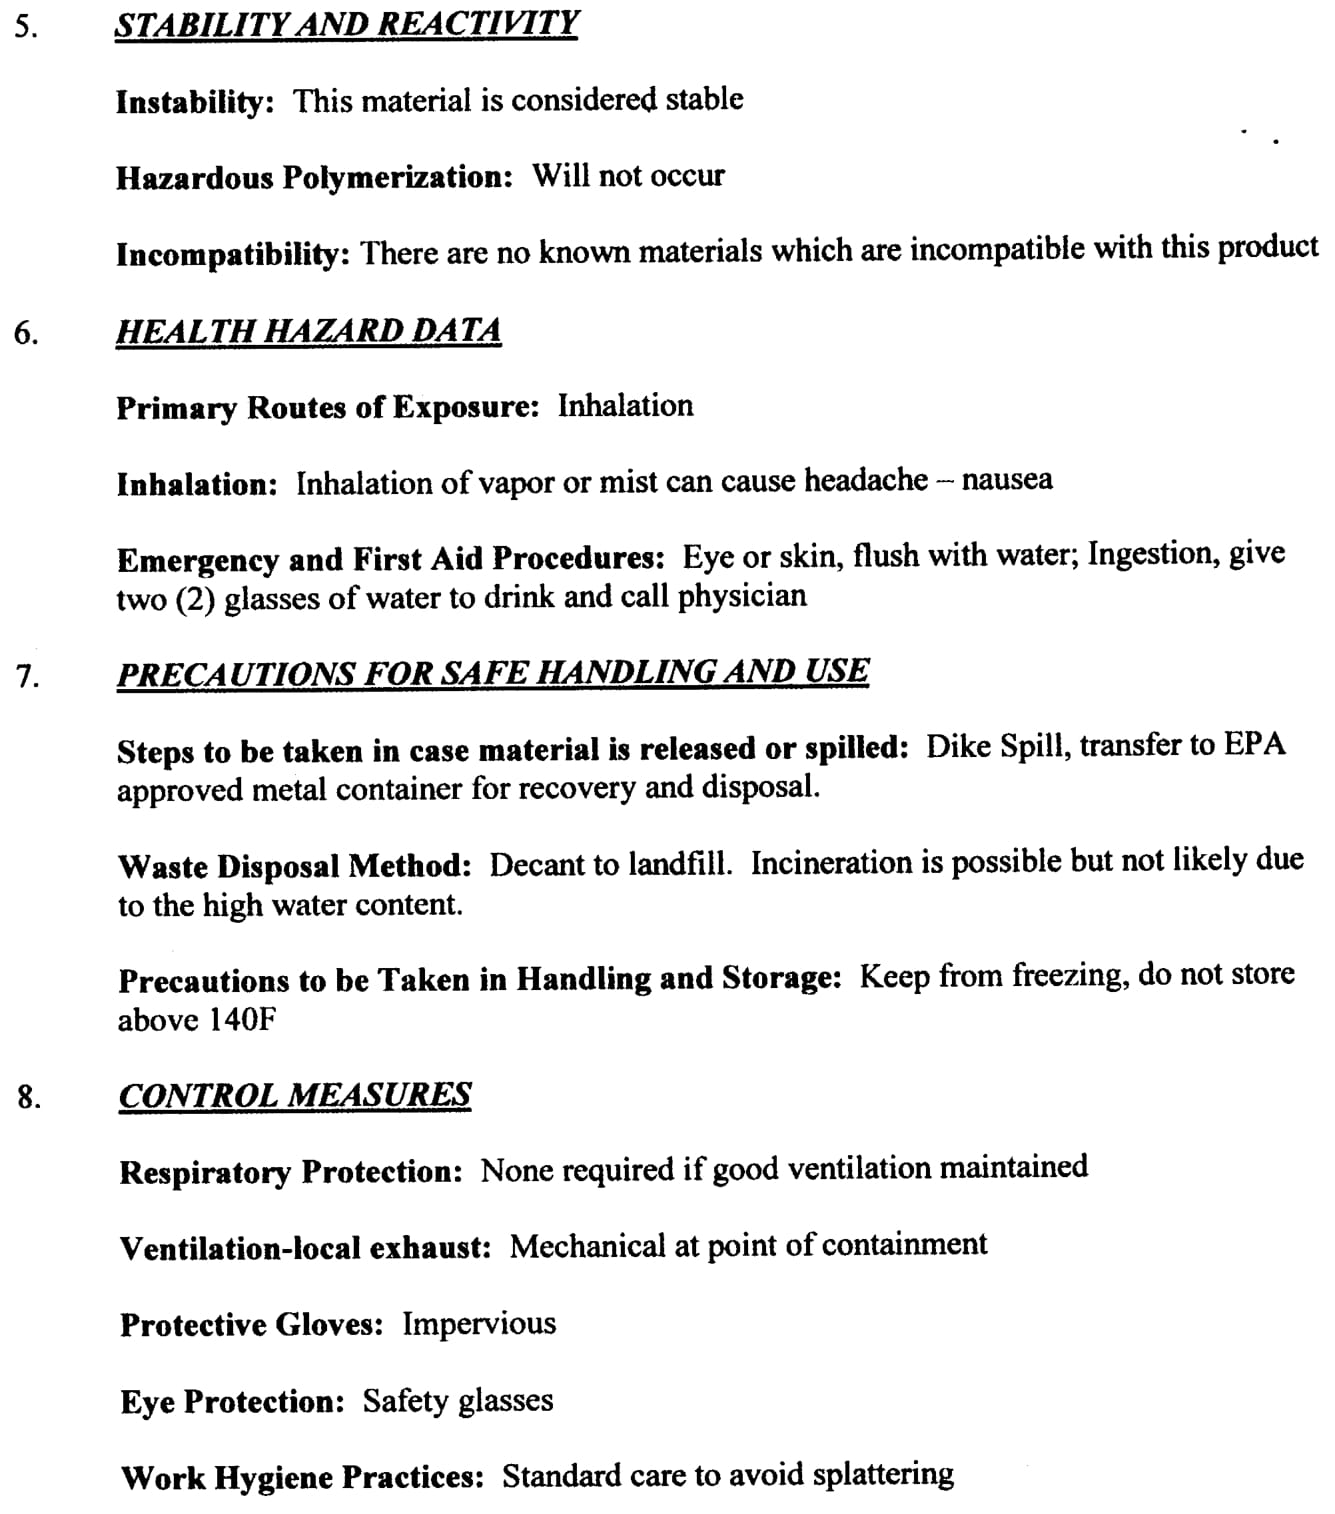 Material Safety Data Sheet (MSDS)